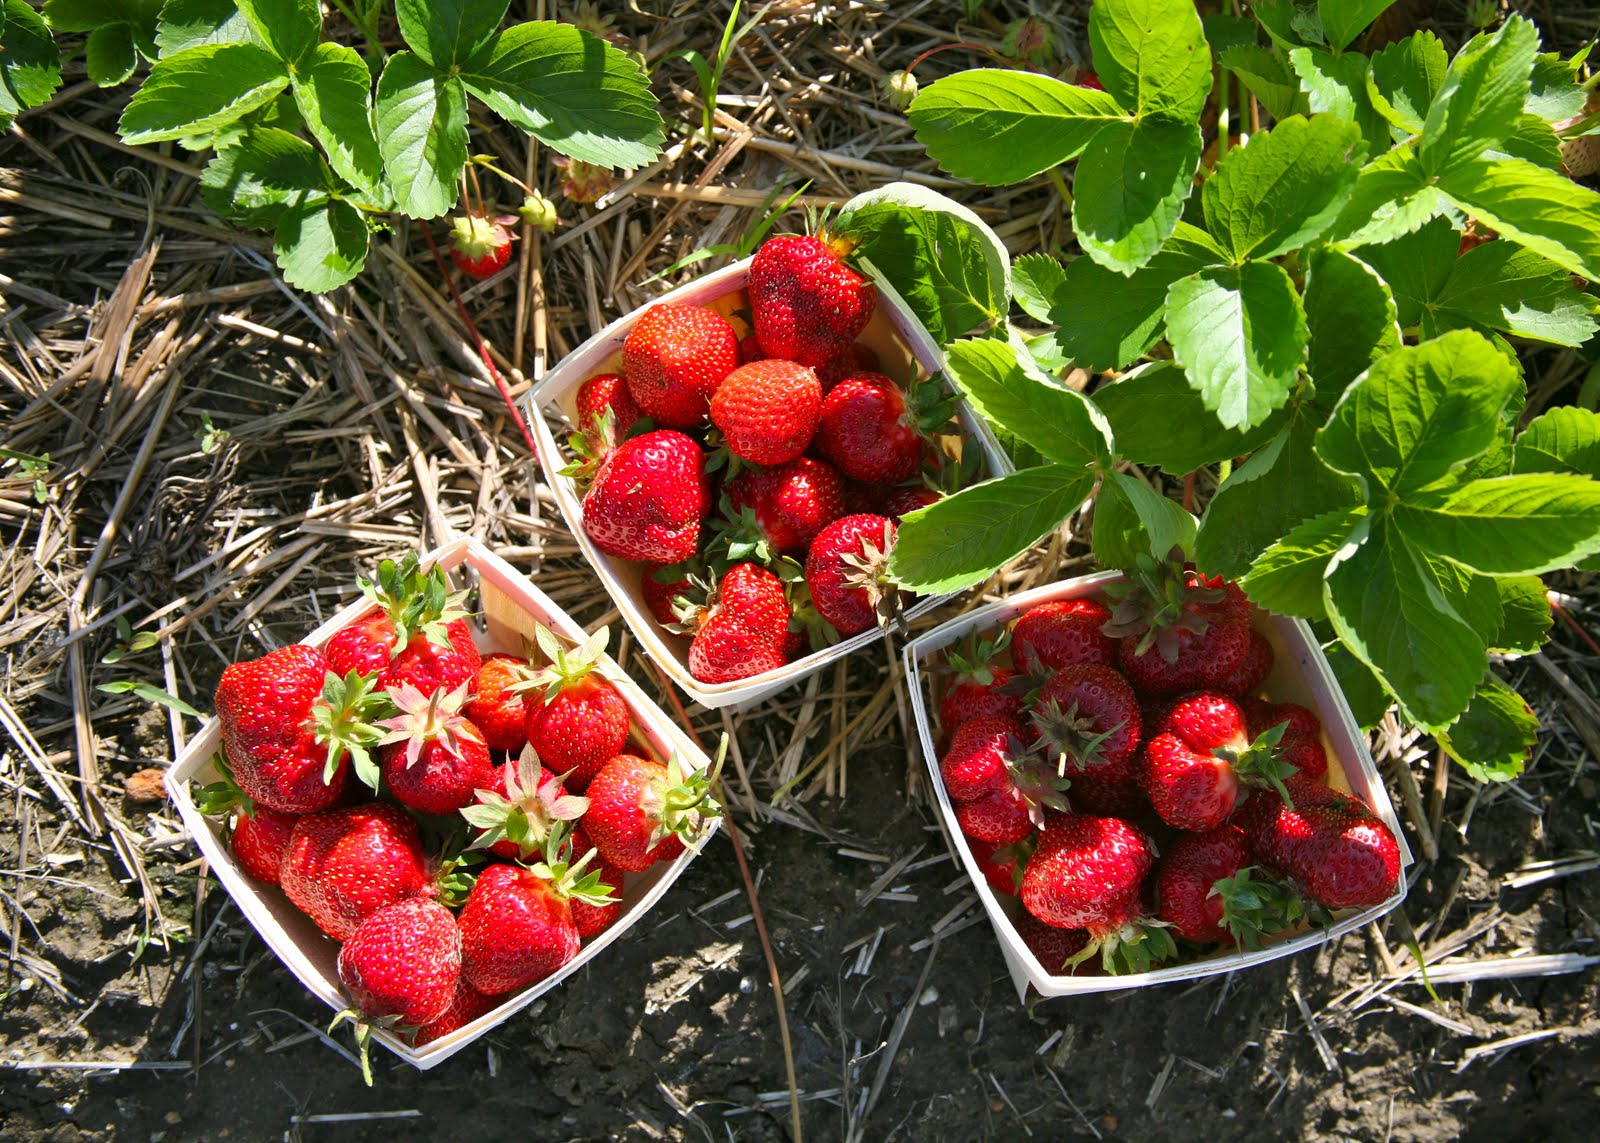 Strawberry boxes